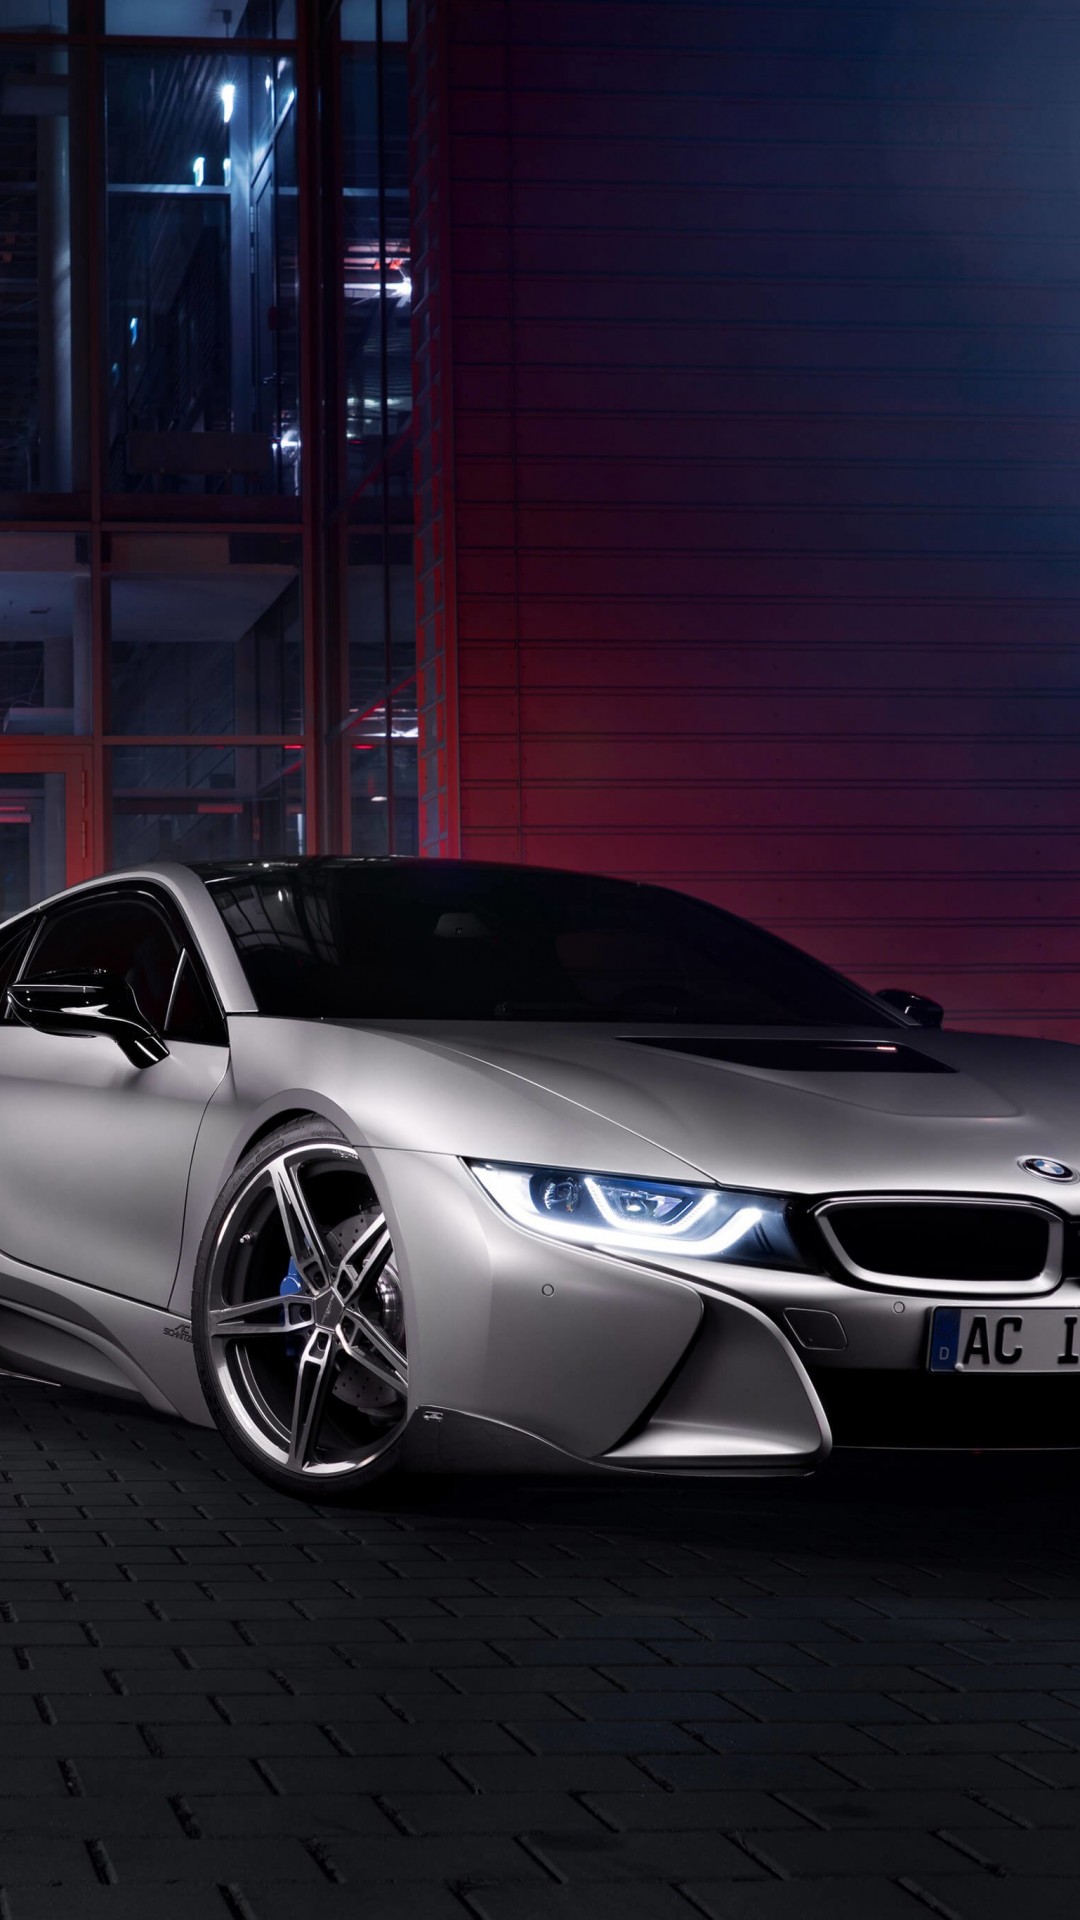 BMW i8 designed by AC Schnitzer Wallpaper for SAMSUNG Galaxy Note 3